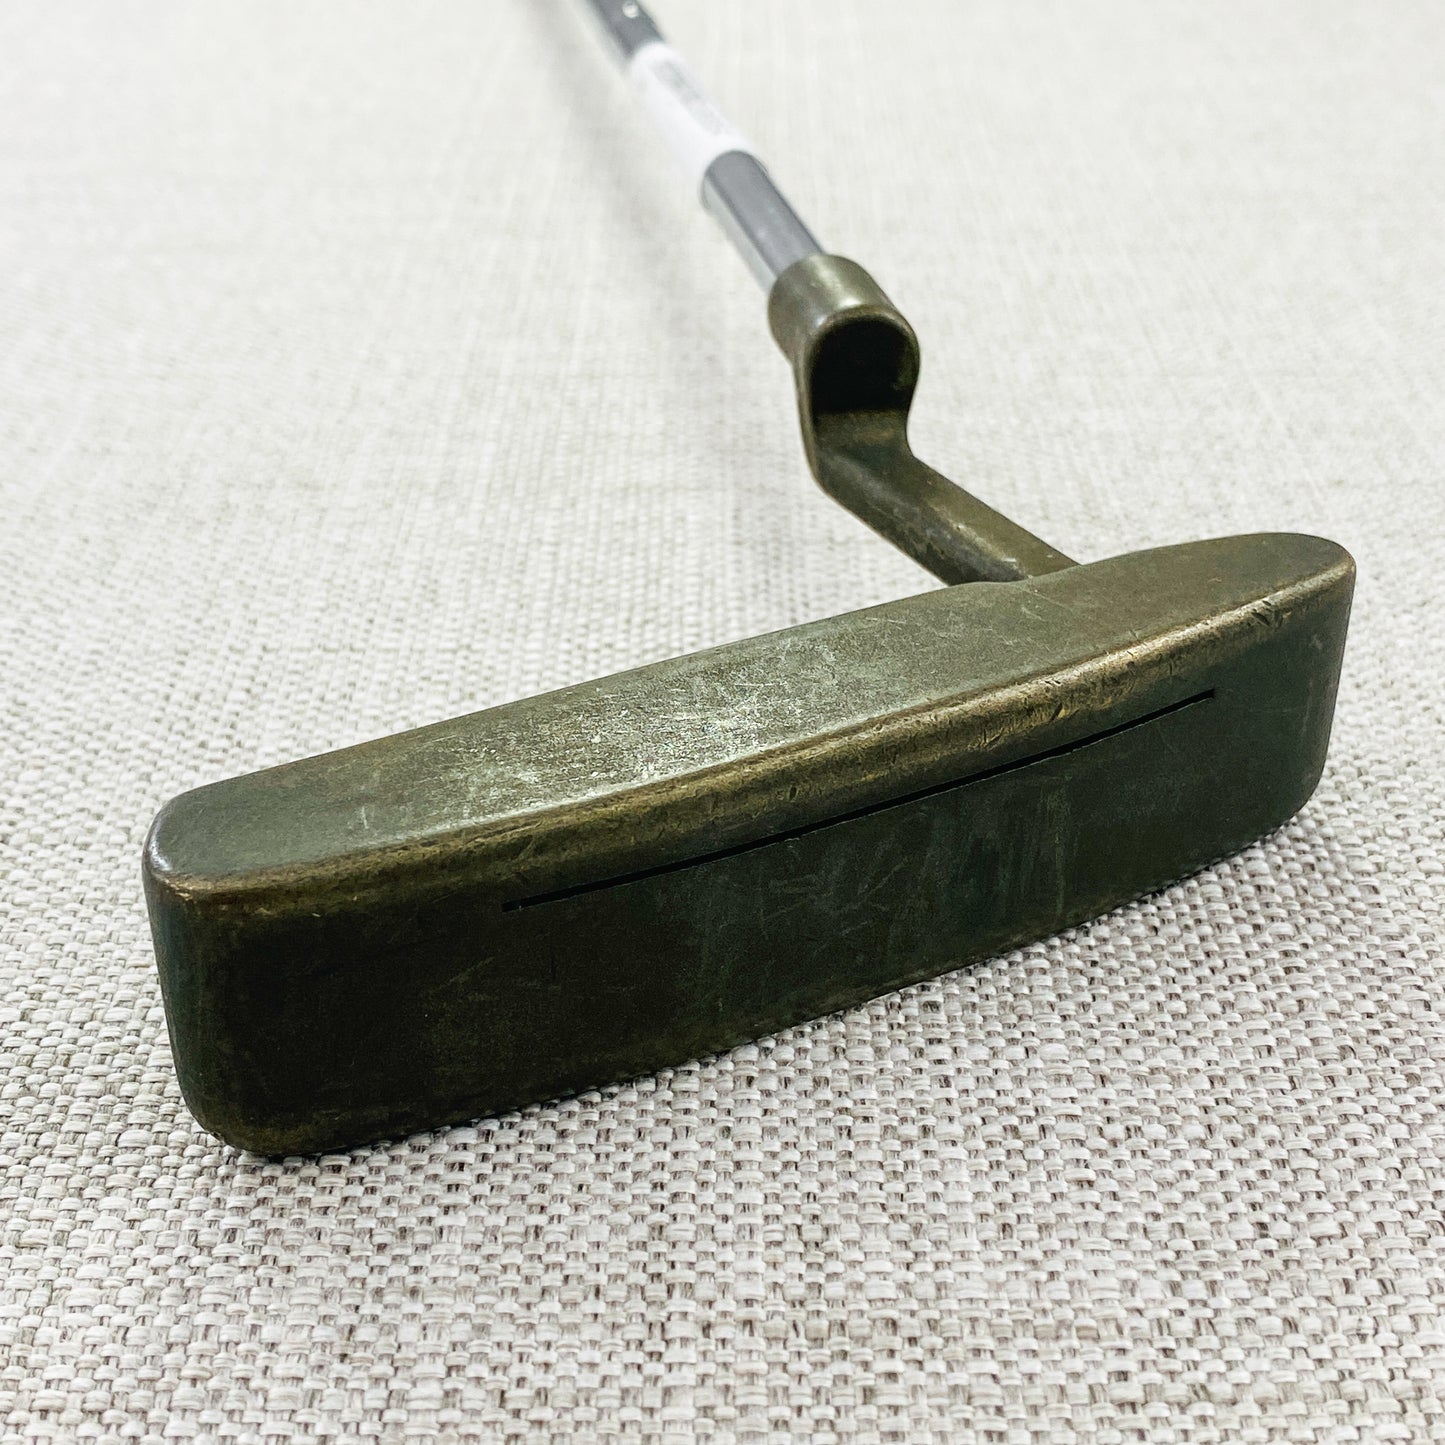 PING Anser Manganese Bronze Putter. 34.5 inch - Good Condition # T674